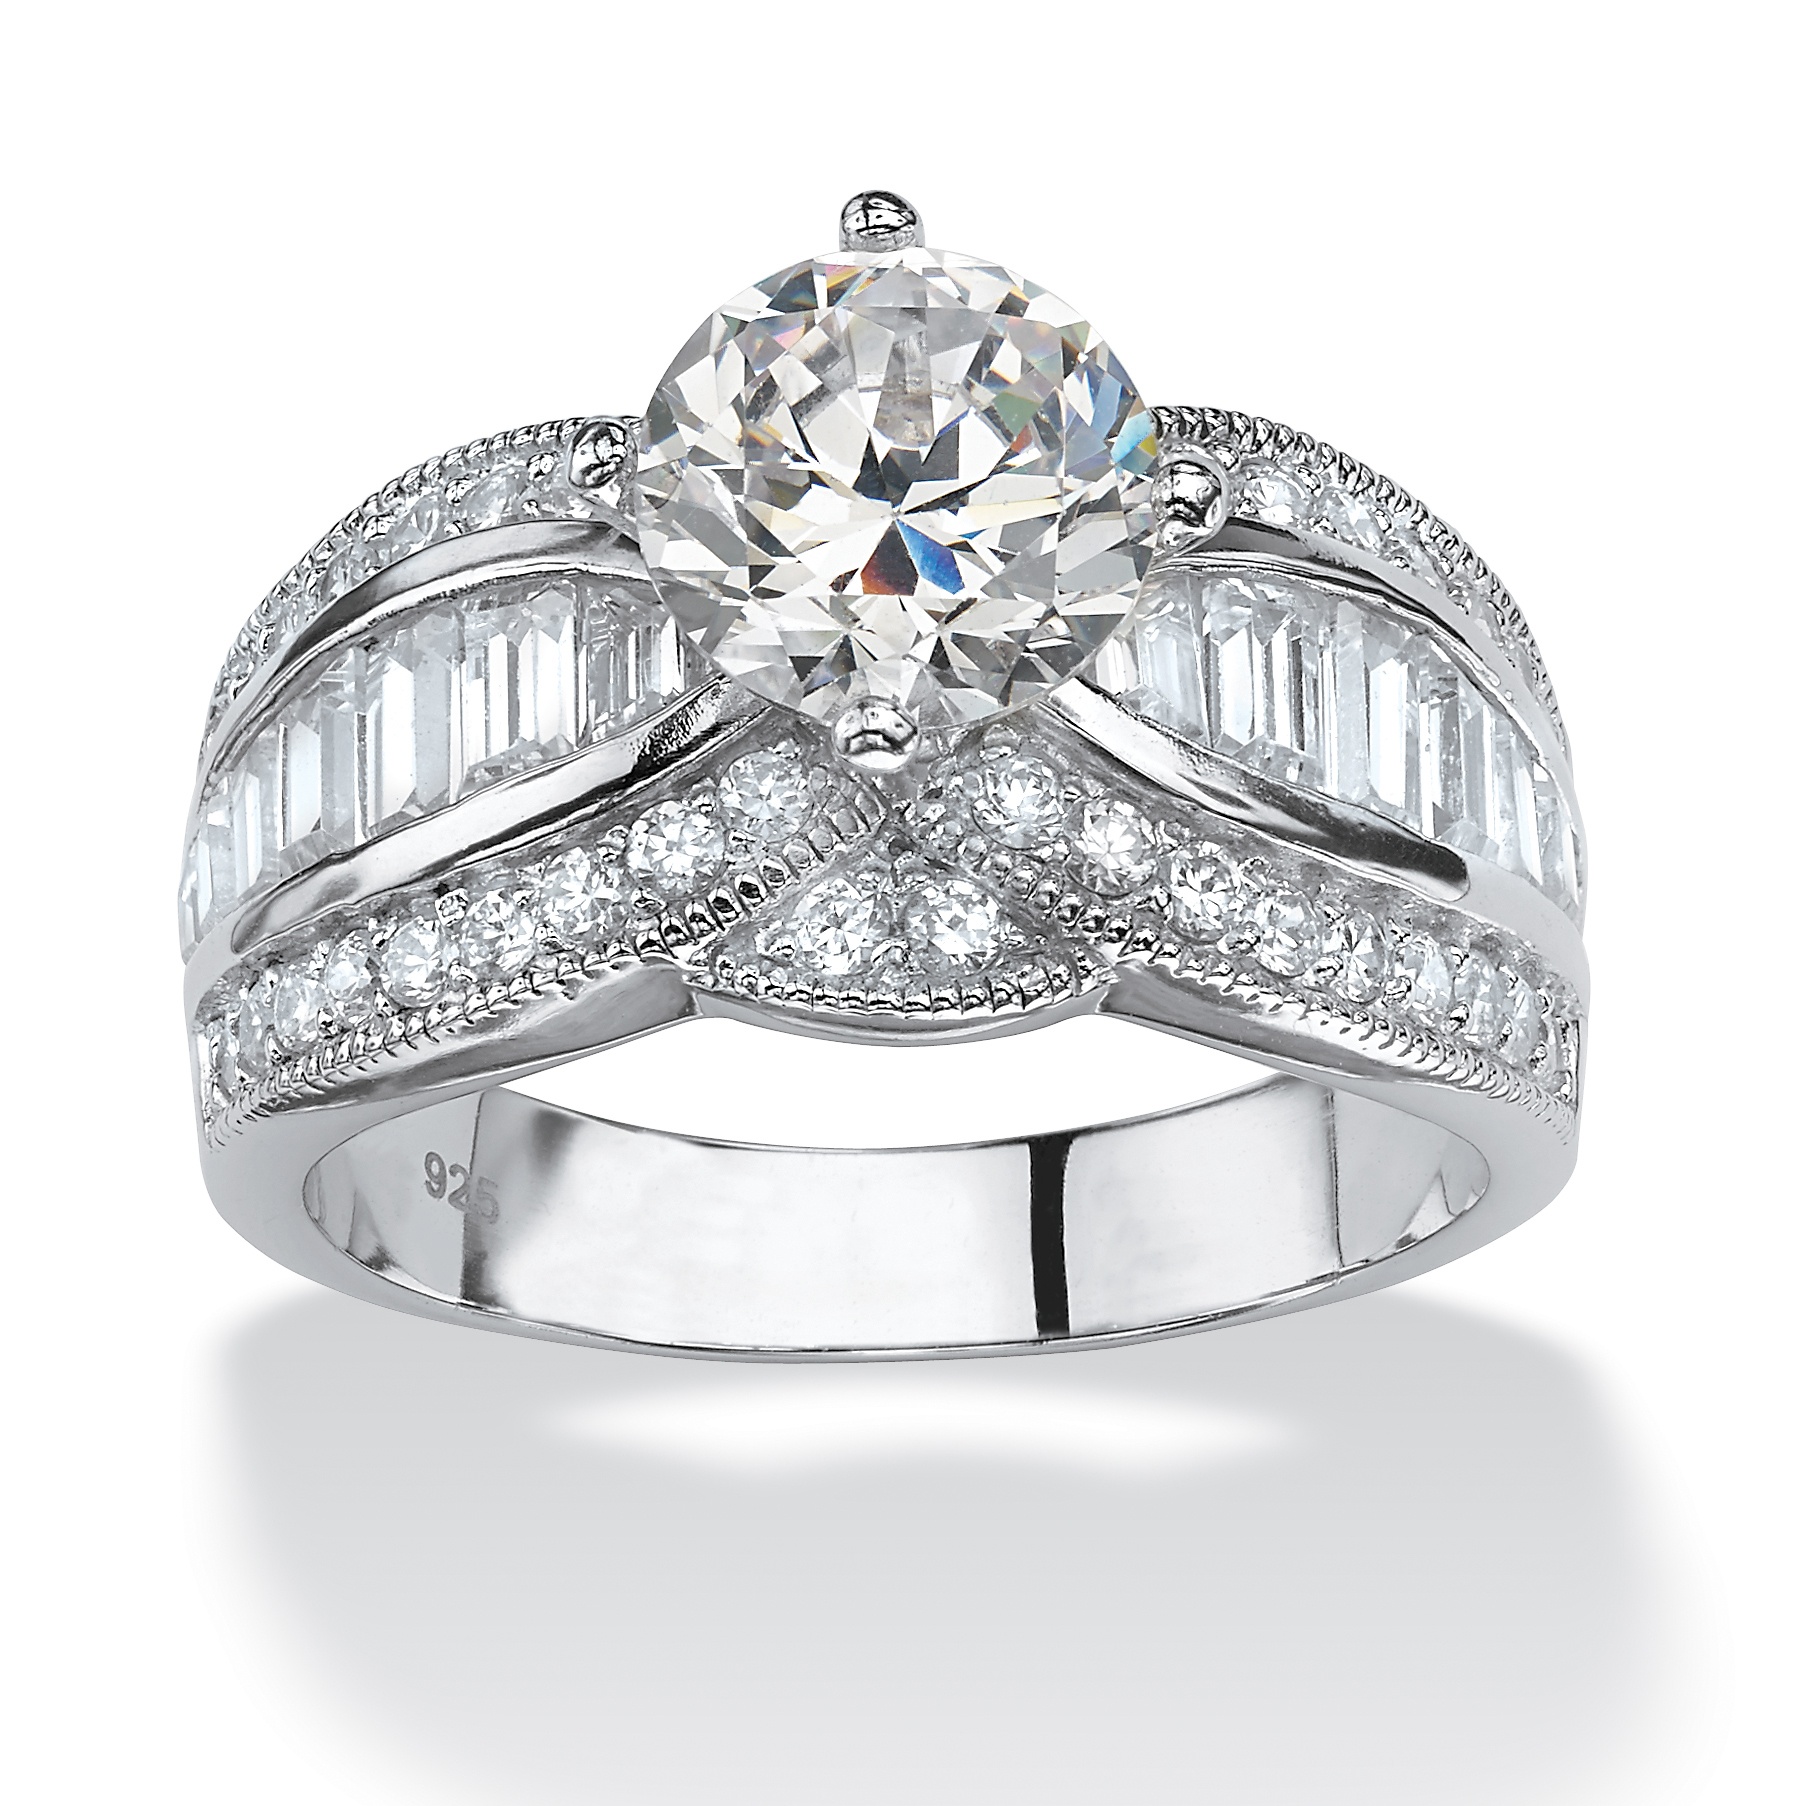 3 84 Tcw Round Cubic Zirconia Platinum Over Sterling Silver Engagement Anniversary Ring At